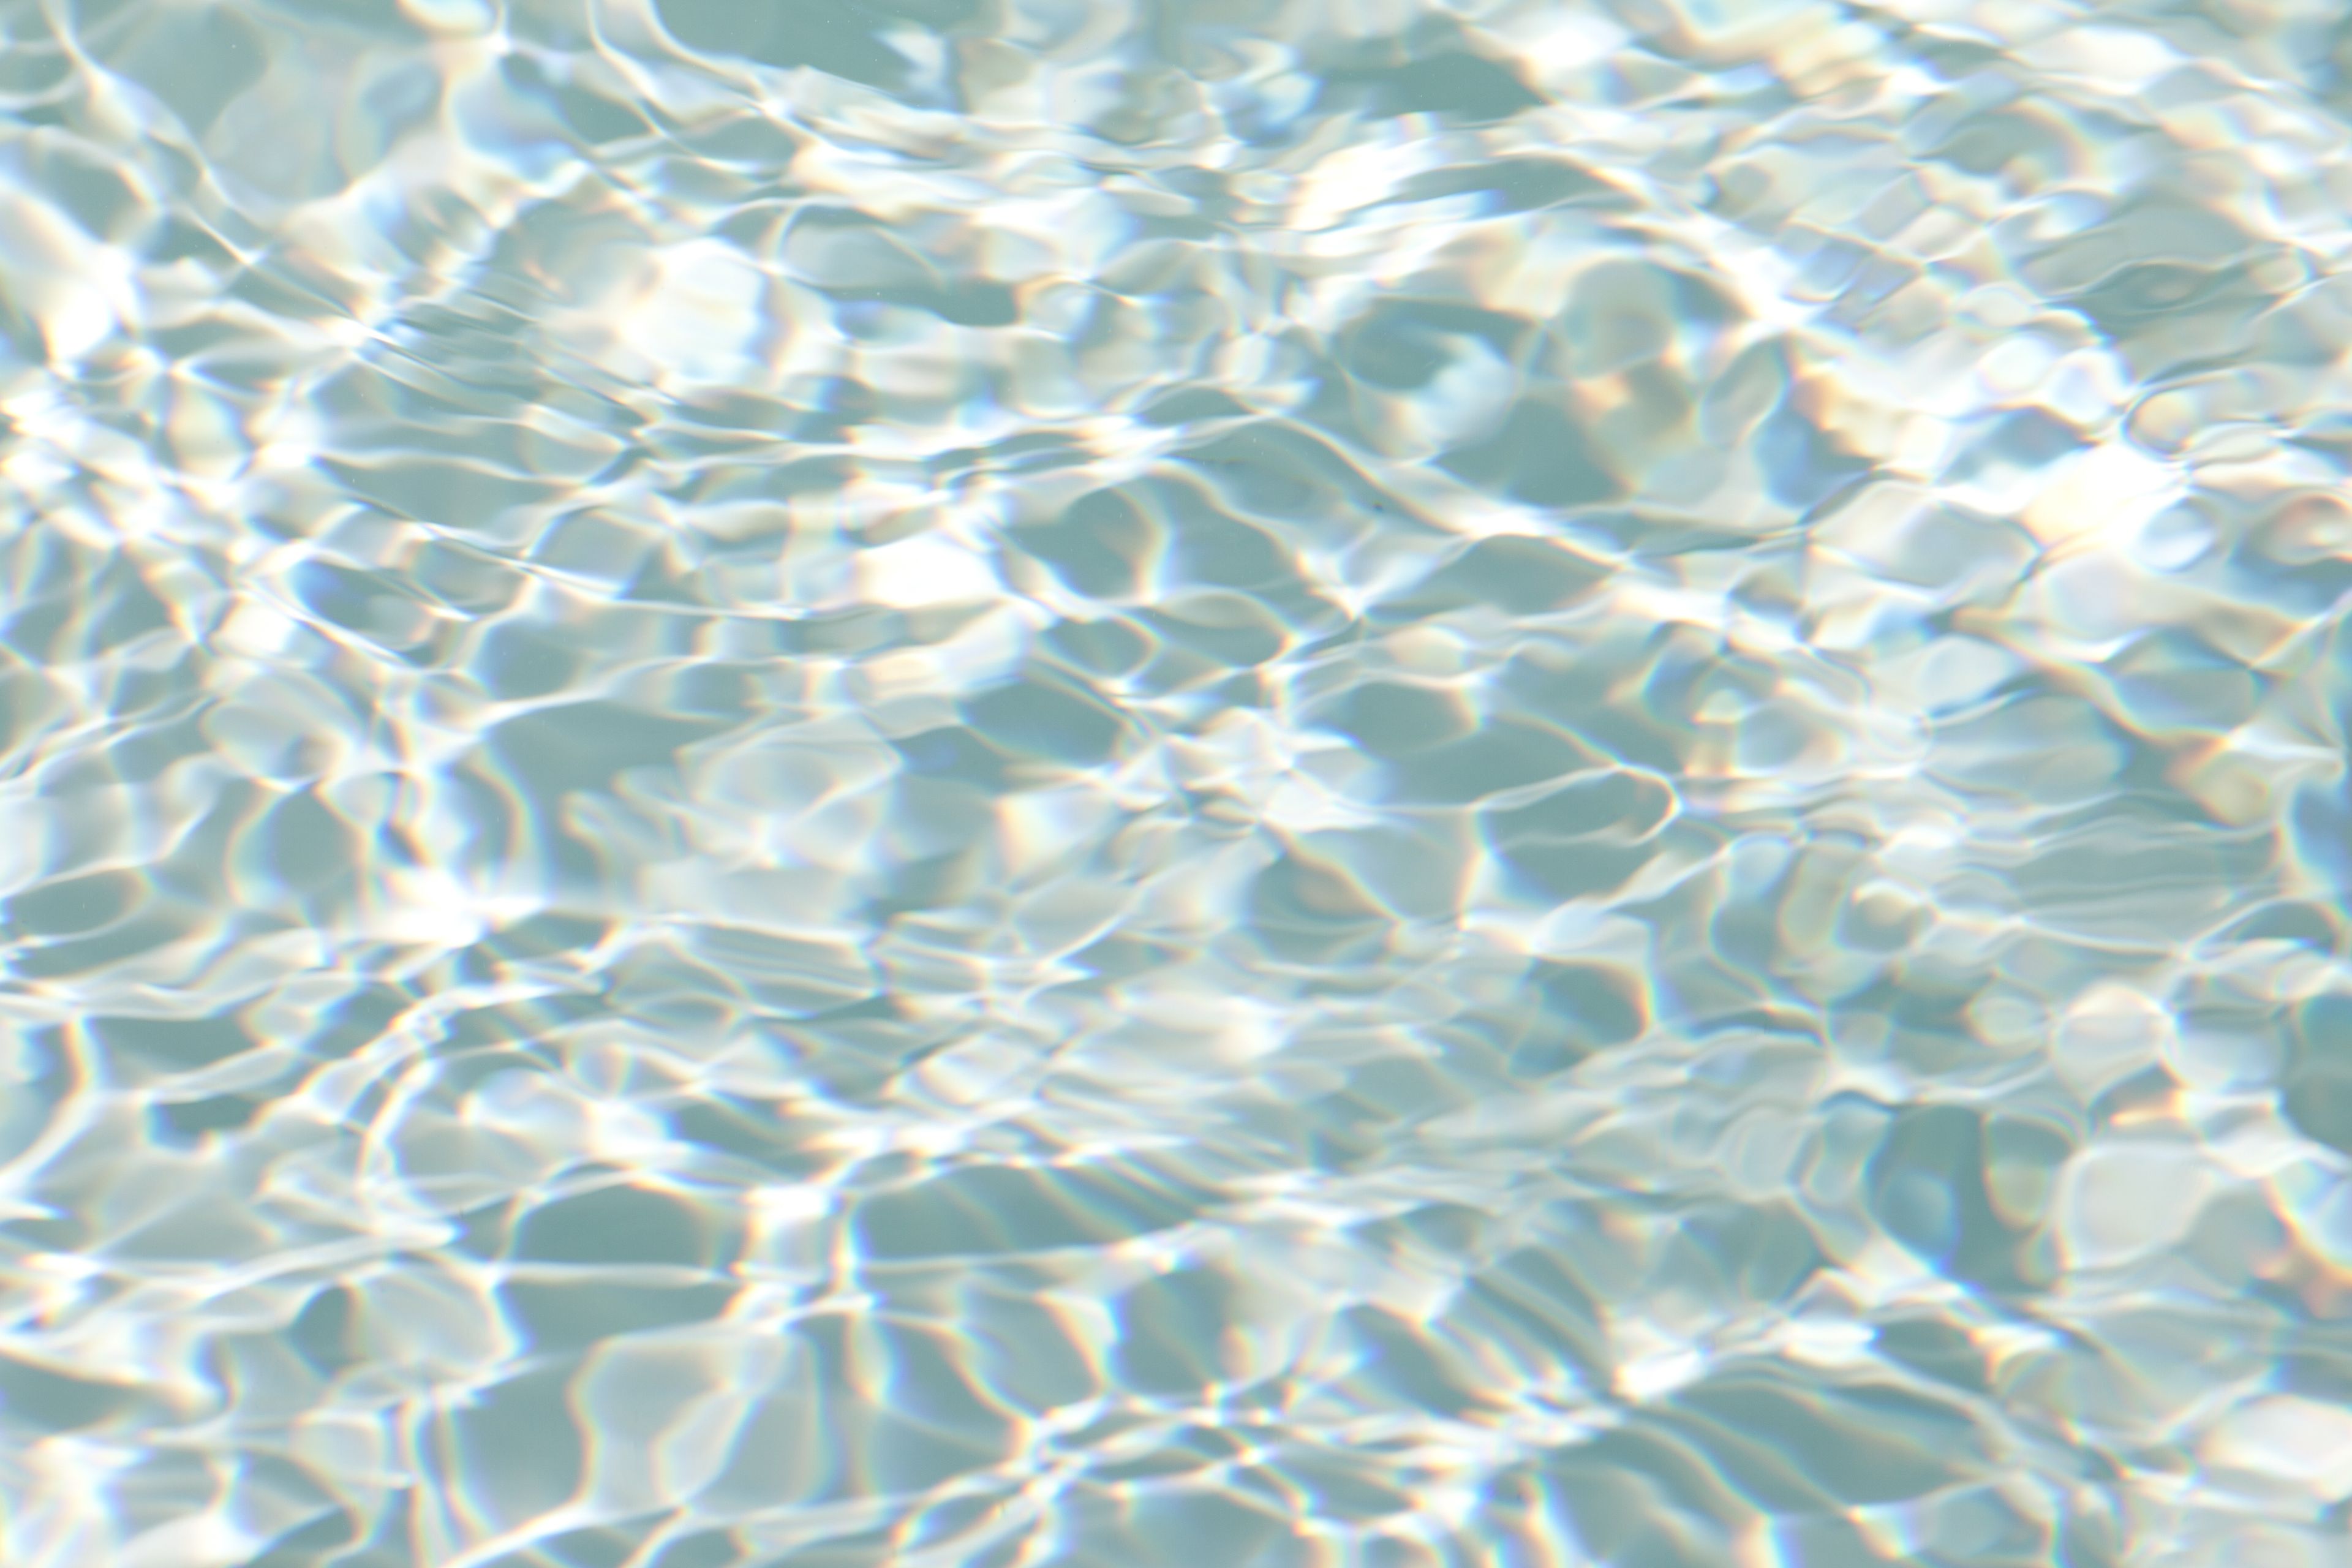 Small waves in a pool of clear blue water.